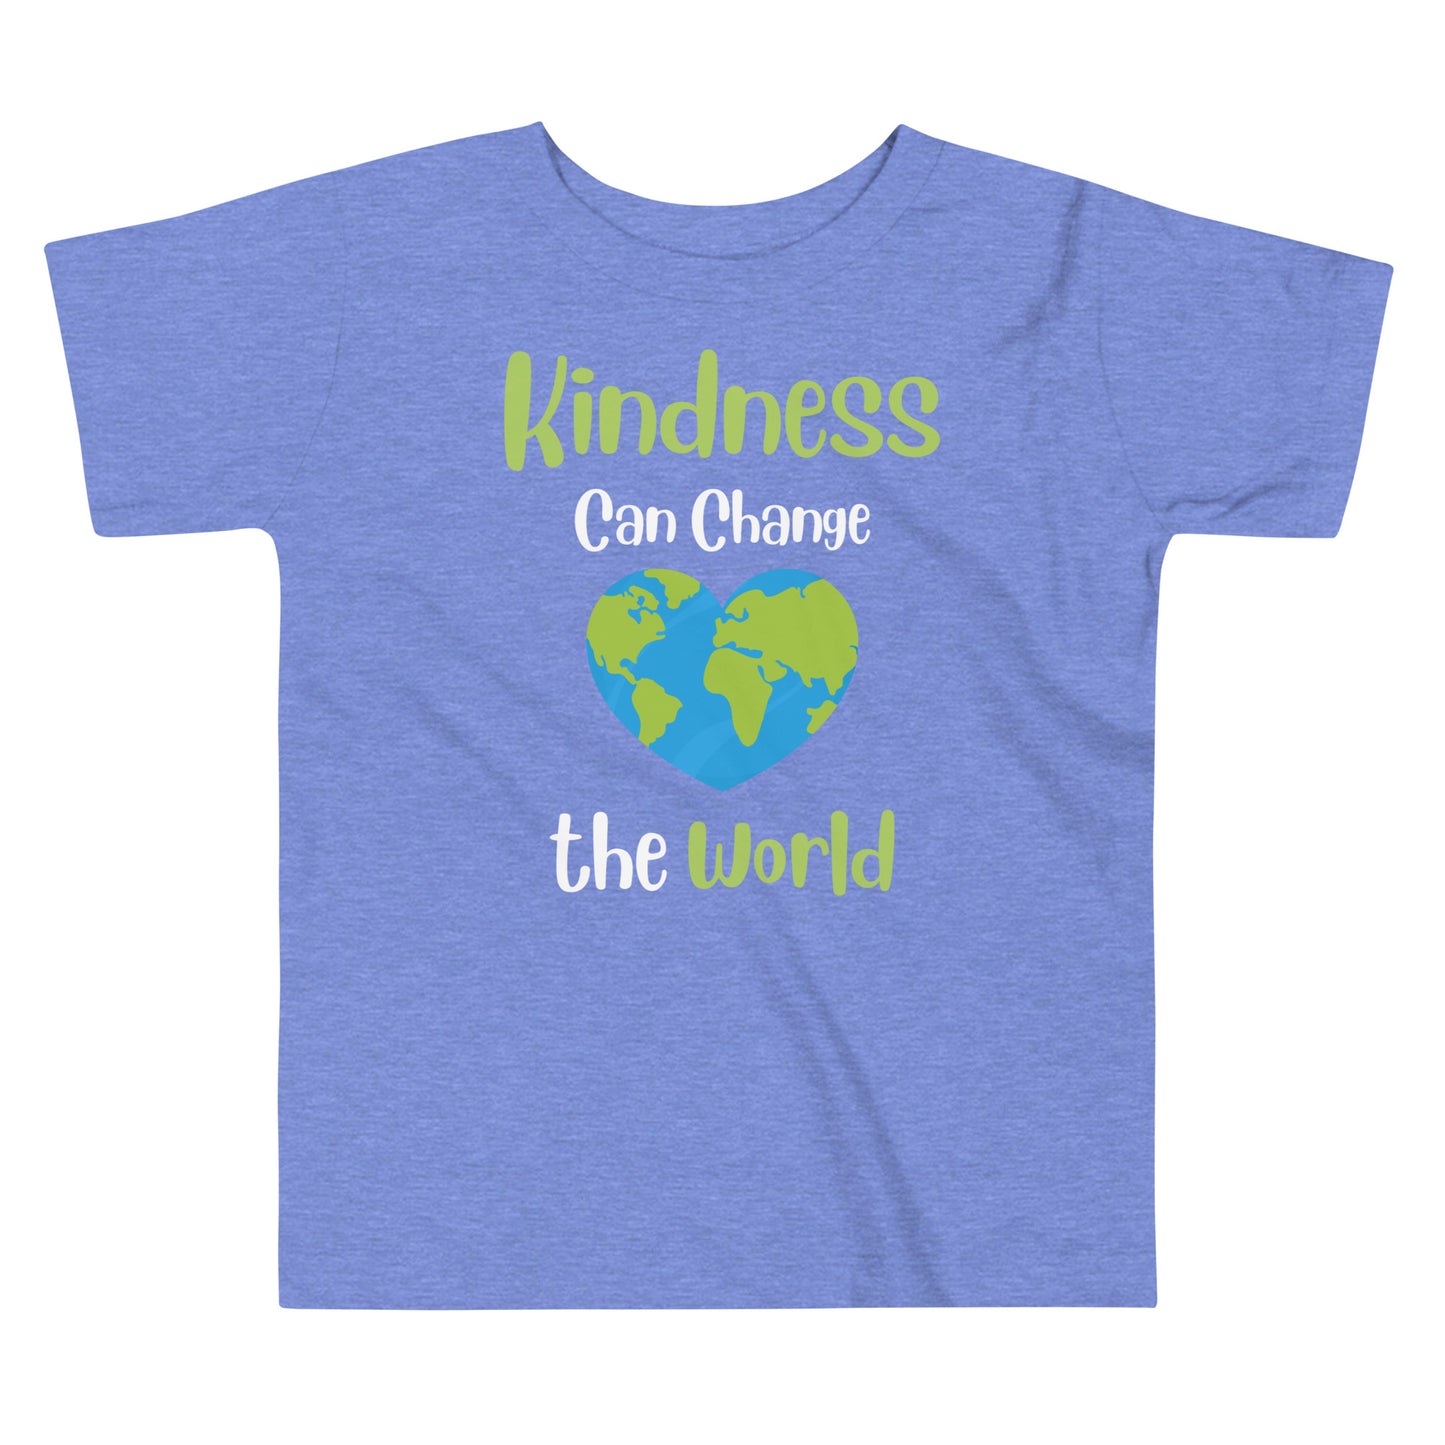 Kindness Can Change the World Quality Cotton Bella Canvas Toddler T-Shirt